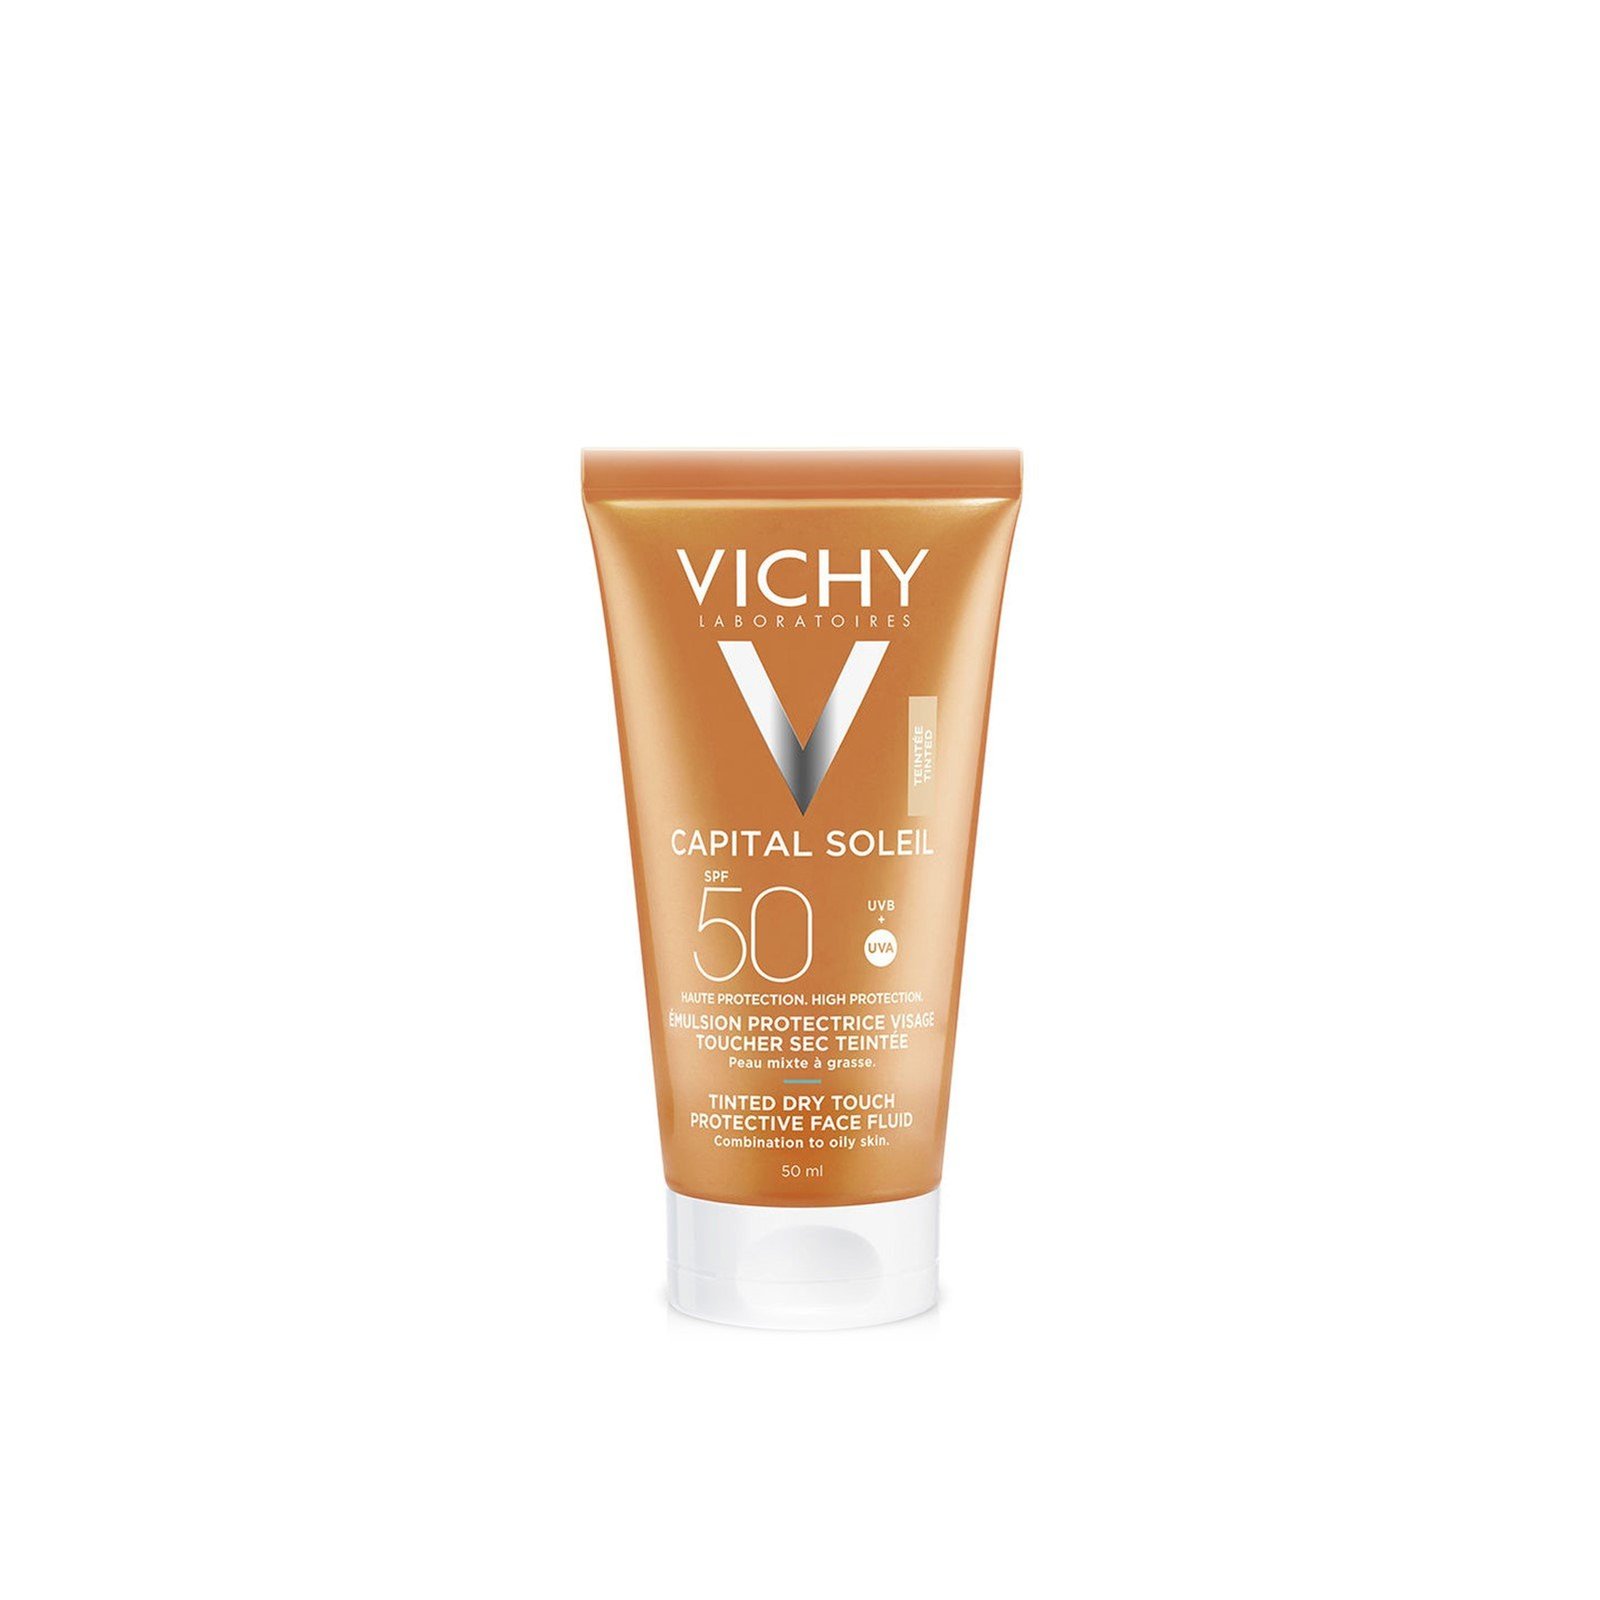 Vichy Capital Soleil Tinted Dry Touch Protective Face Fluid SPF50 50ml